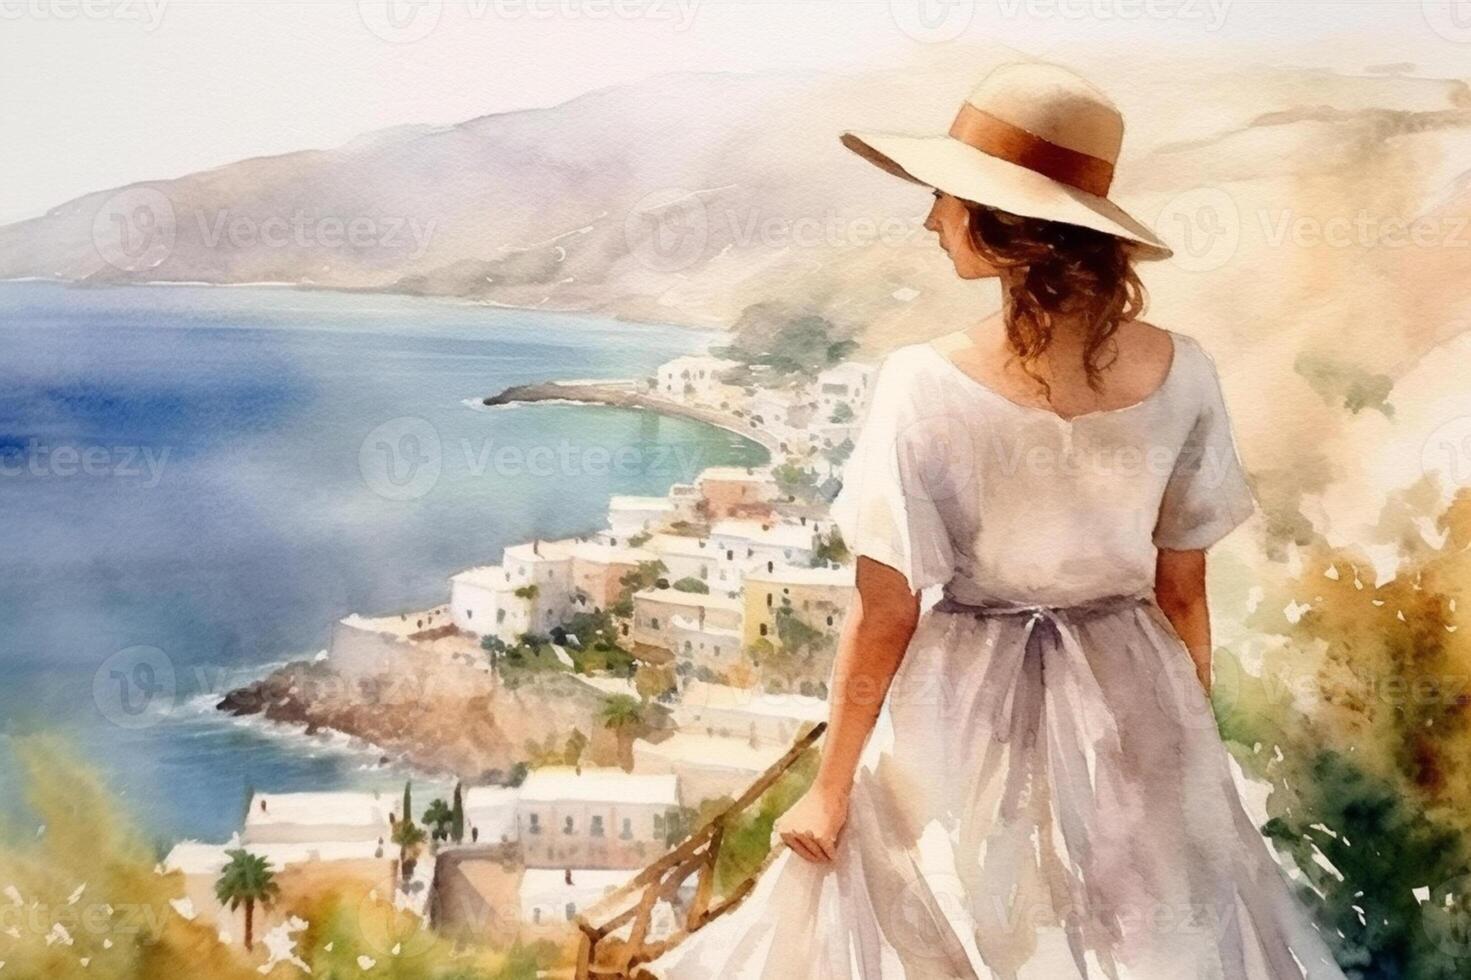 Illustration in a watercolor style. Beautiful girl in dress and hat looking down at beautiful sea town from viewing platform. Viewed from behind. Travel and relax. . photo